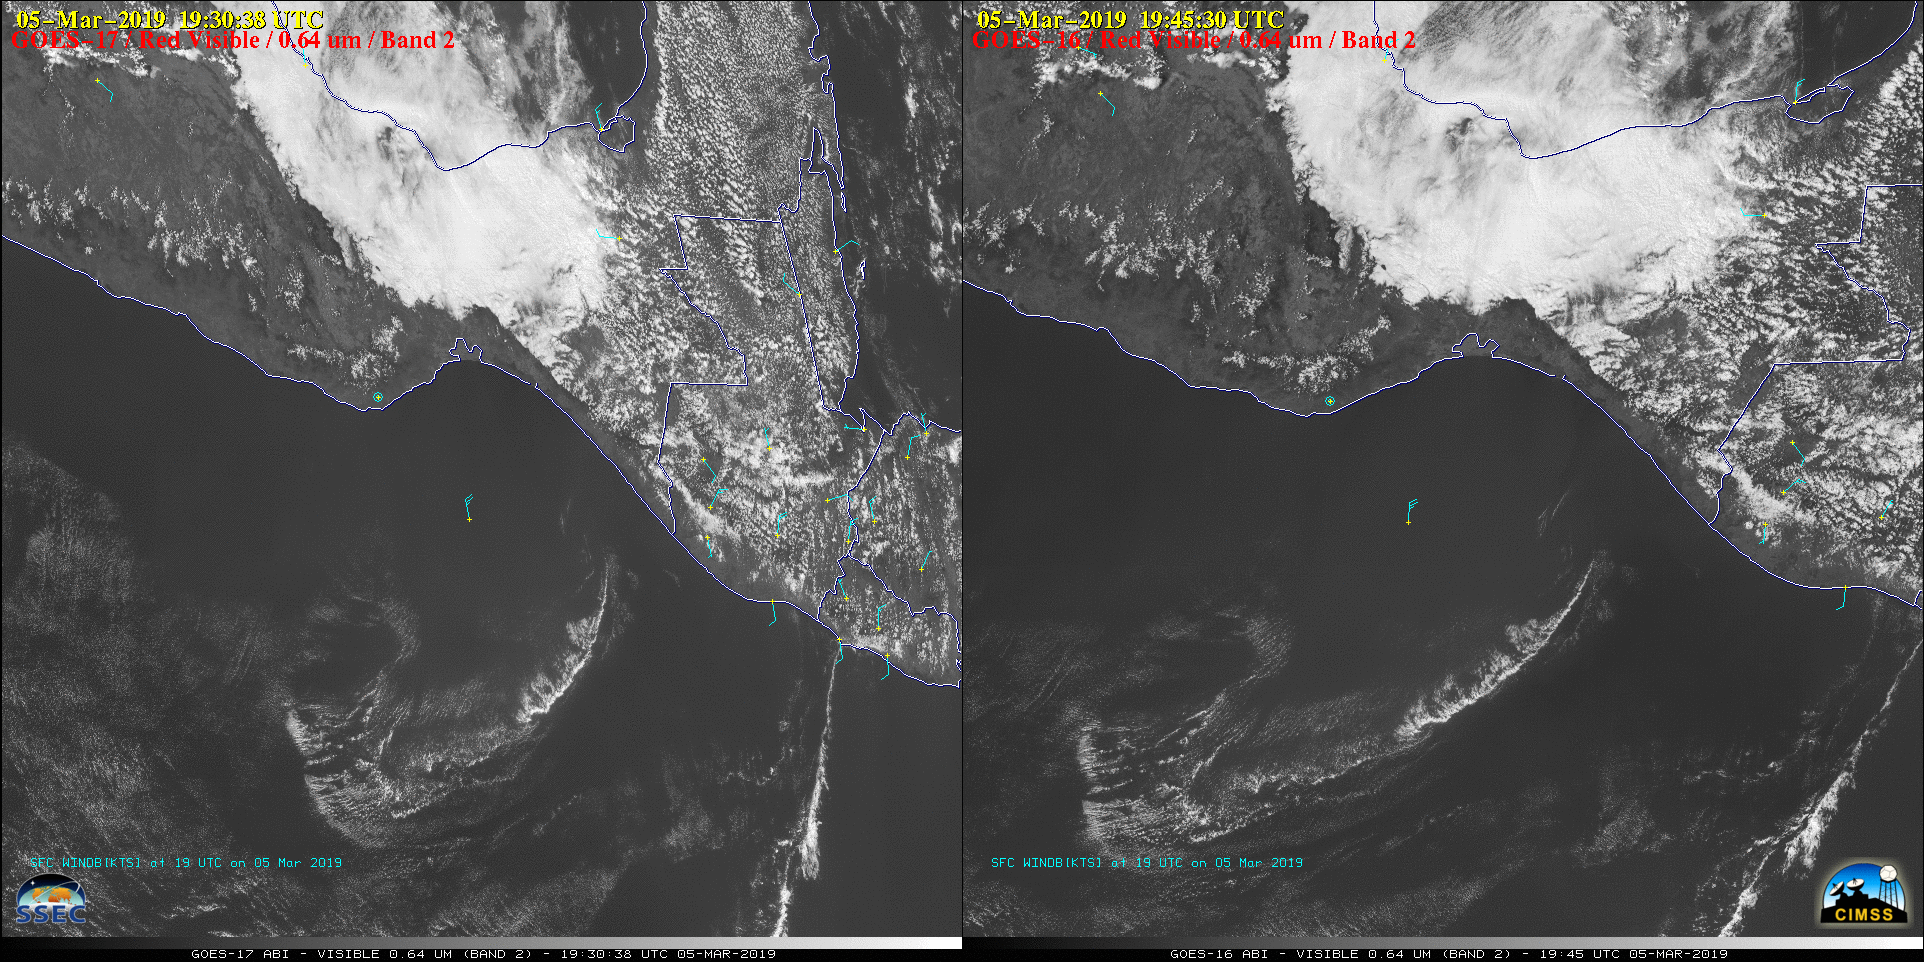 GOES-17 (left) and GOES-16 (right) 